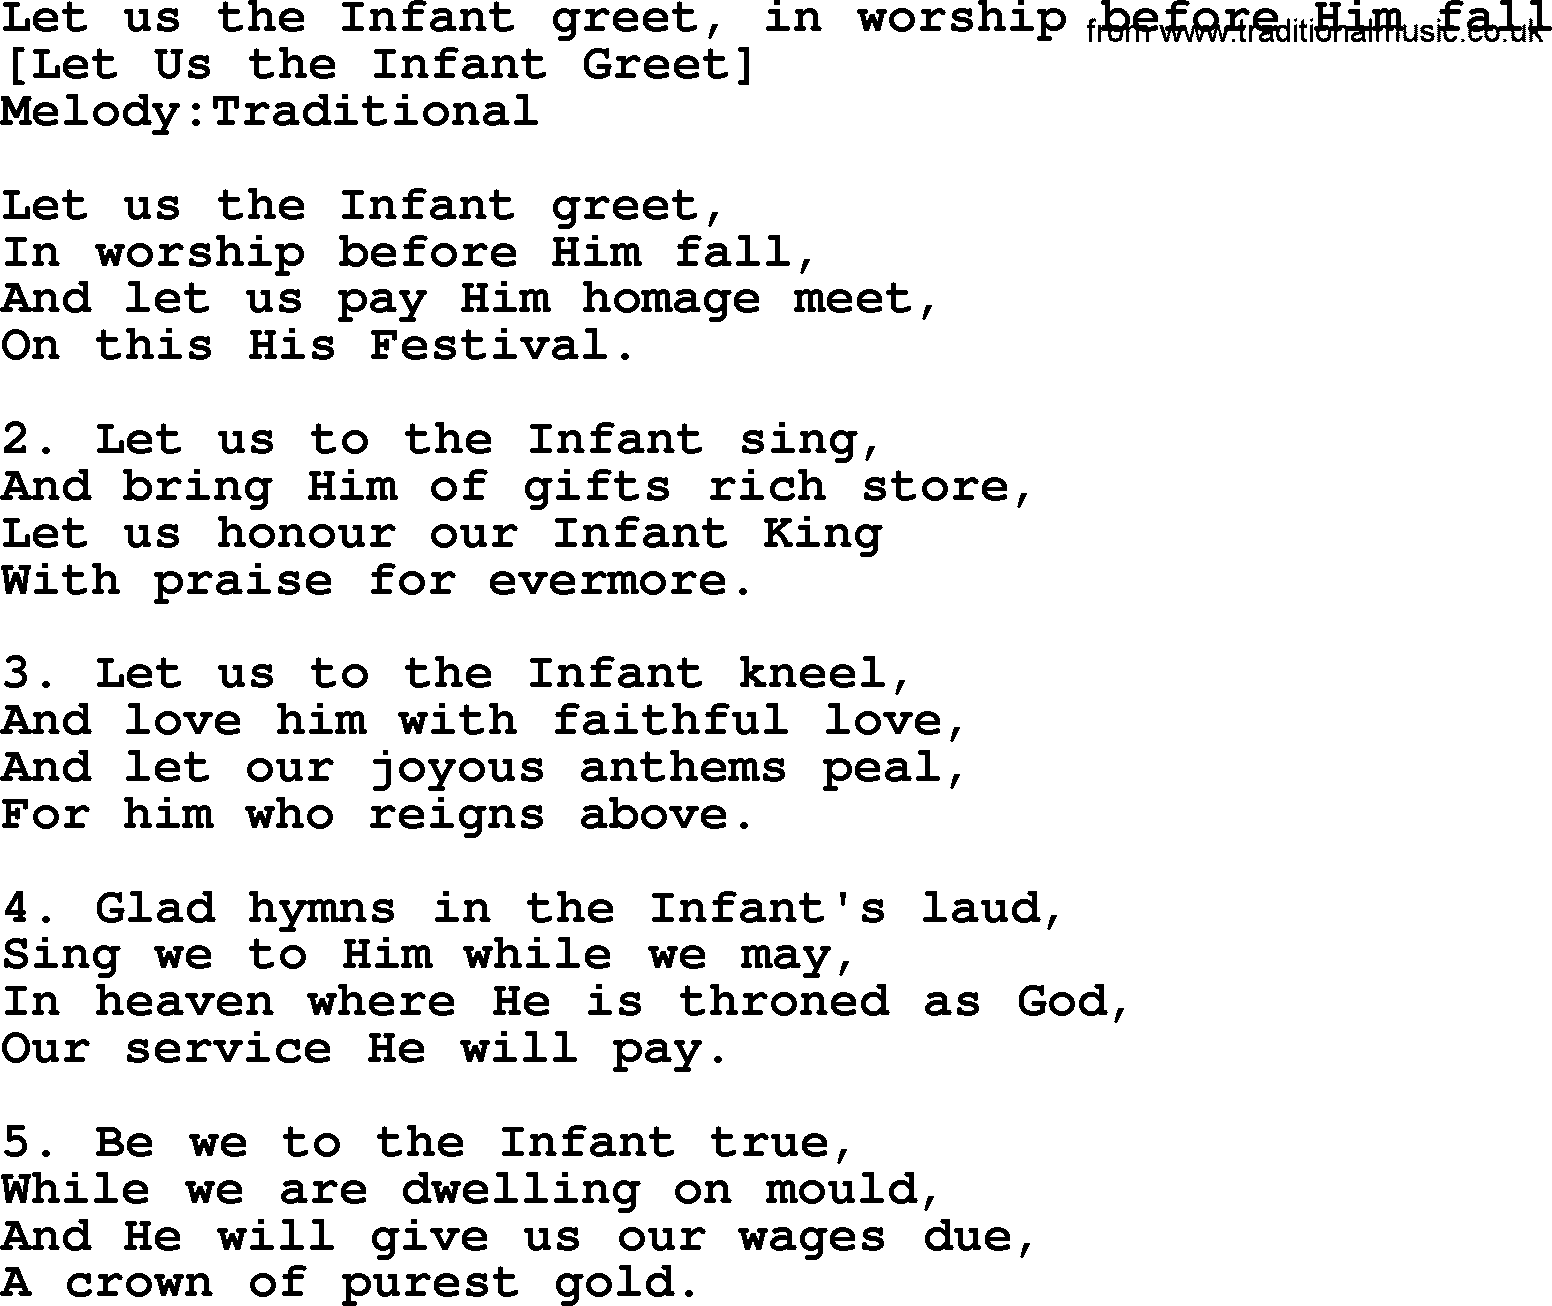 Old English Song: Let Us The Infant Greet, In Worship Before Him Fall lyrics